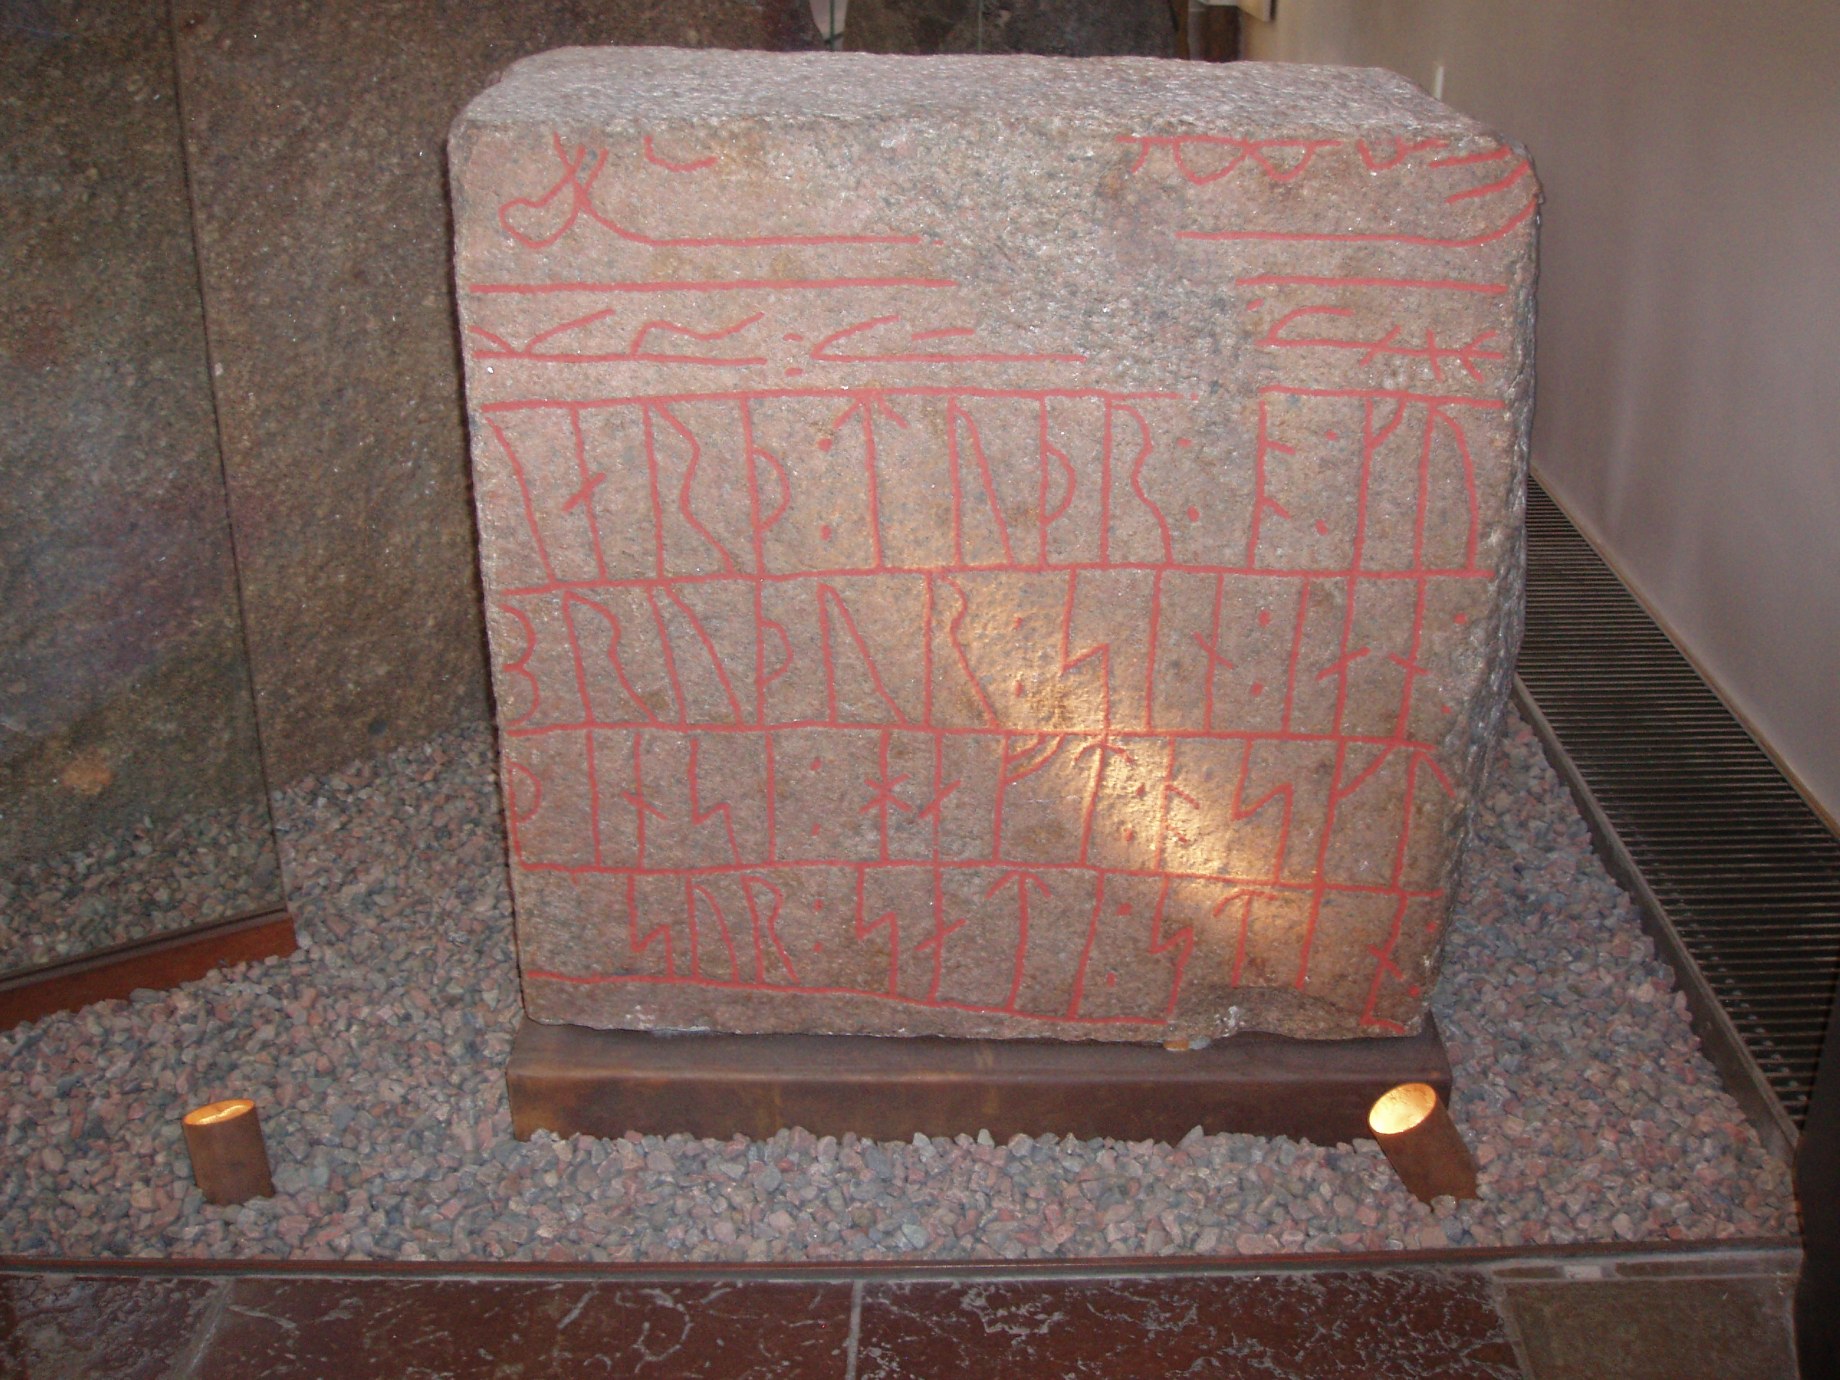 Sønder Kirkeby Runestone at the National Museum of Denmark. Photo by Wikimedia user Holt, May 2008